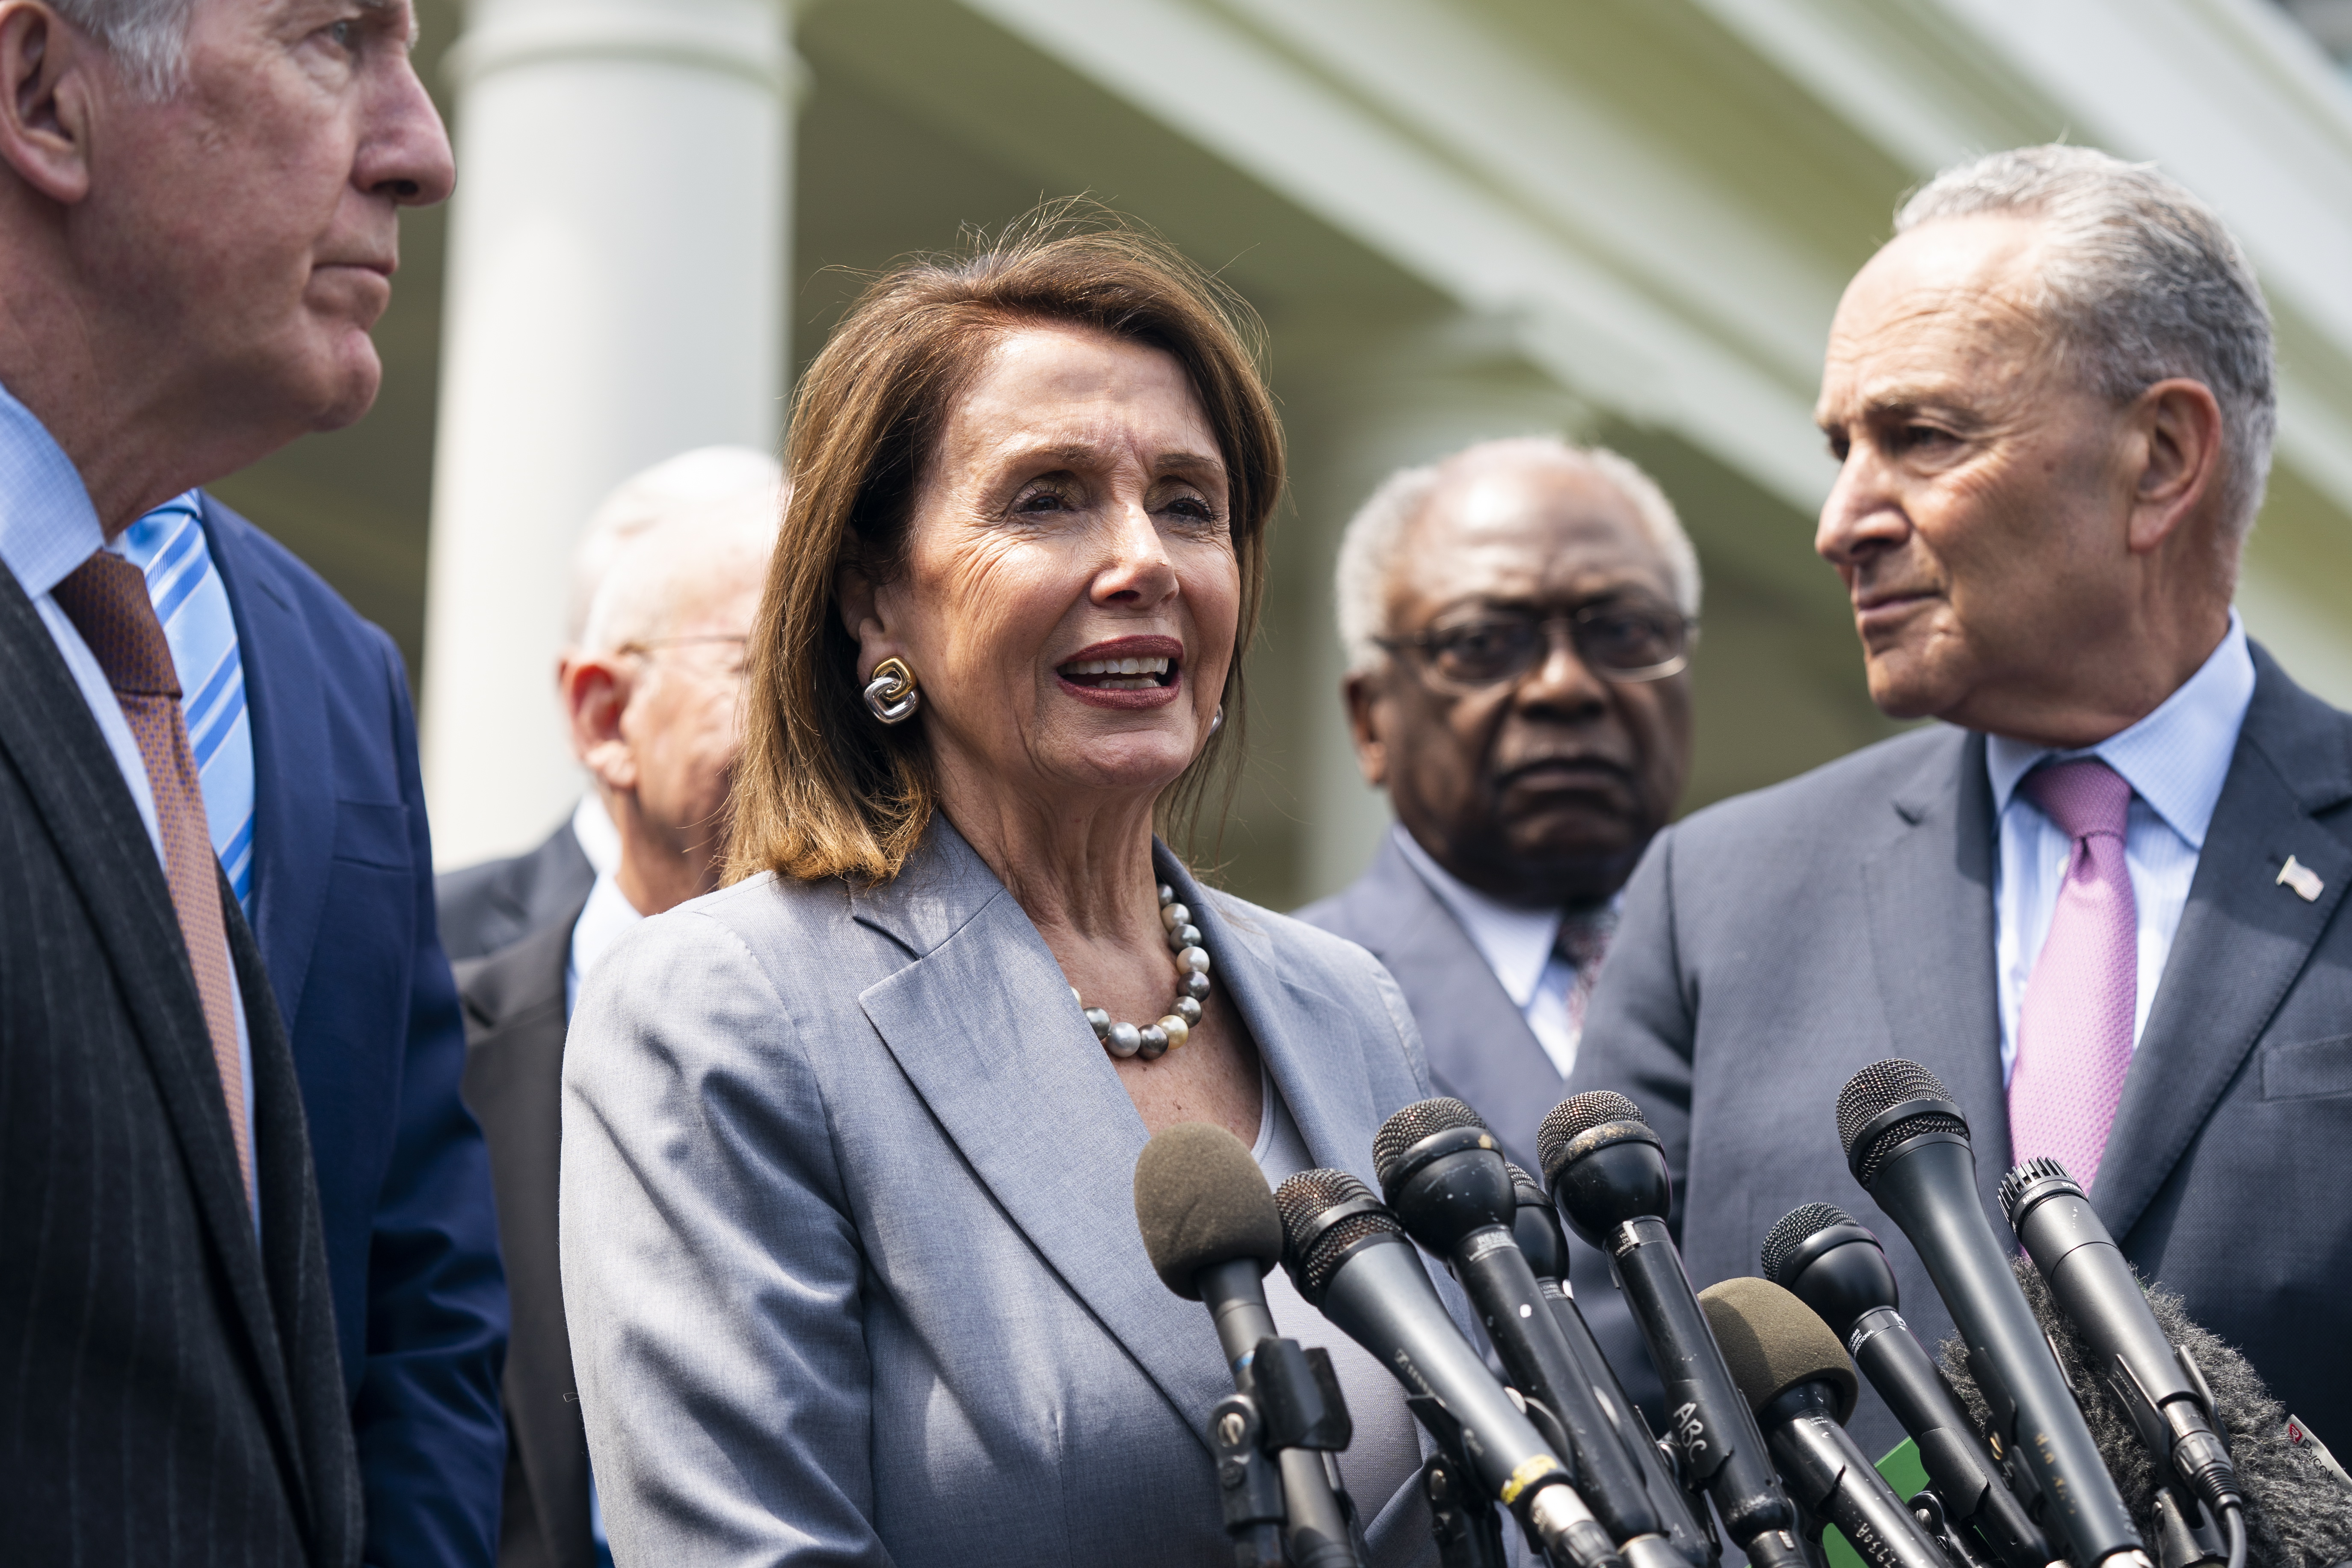 epa07538409 Democratic Speaker of the House from California Nancy Pelosi (C) and Senate Minority Leader from New York Chuck Schumer (R), along with other Democratic lawmakers, prepare to speak to the media outside the West Wing after meeting with President Trump about infrastructure funding at the White House in Washington, DC, USA, 30 April 2019.  EPA/JIM LO SCALZO